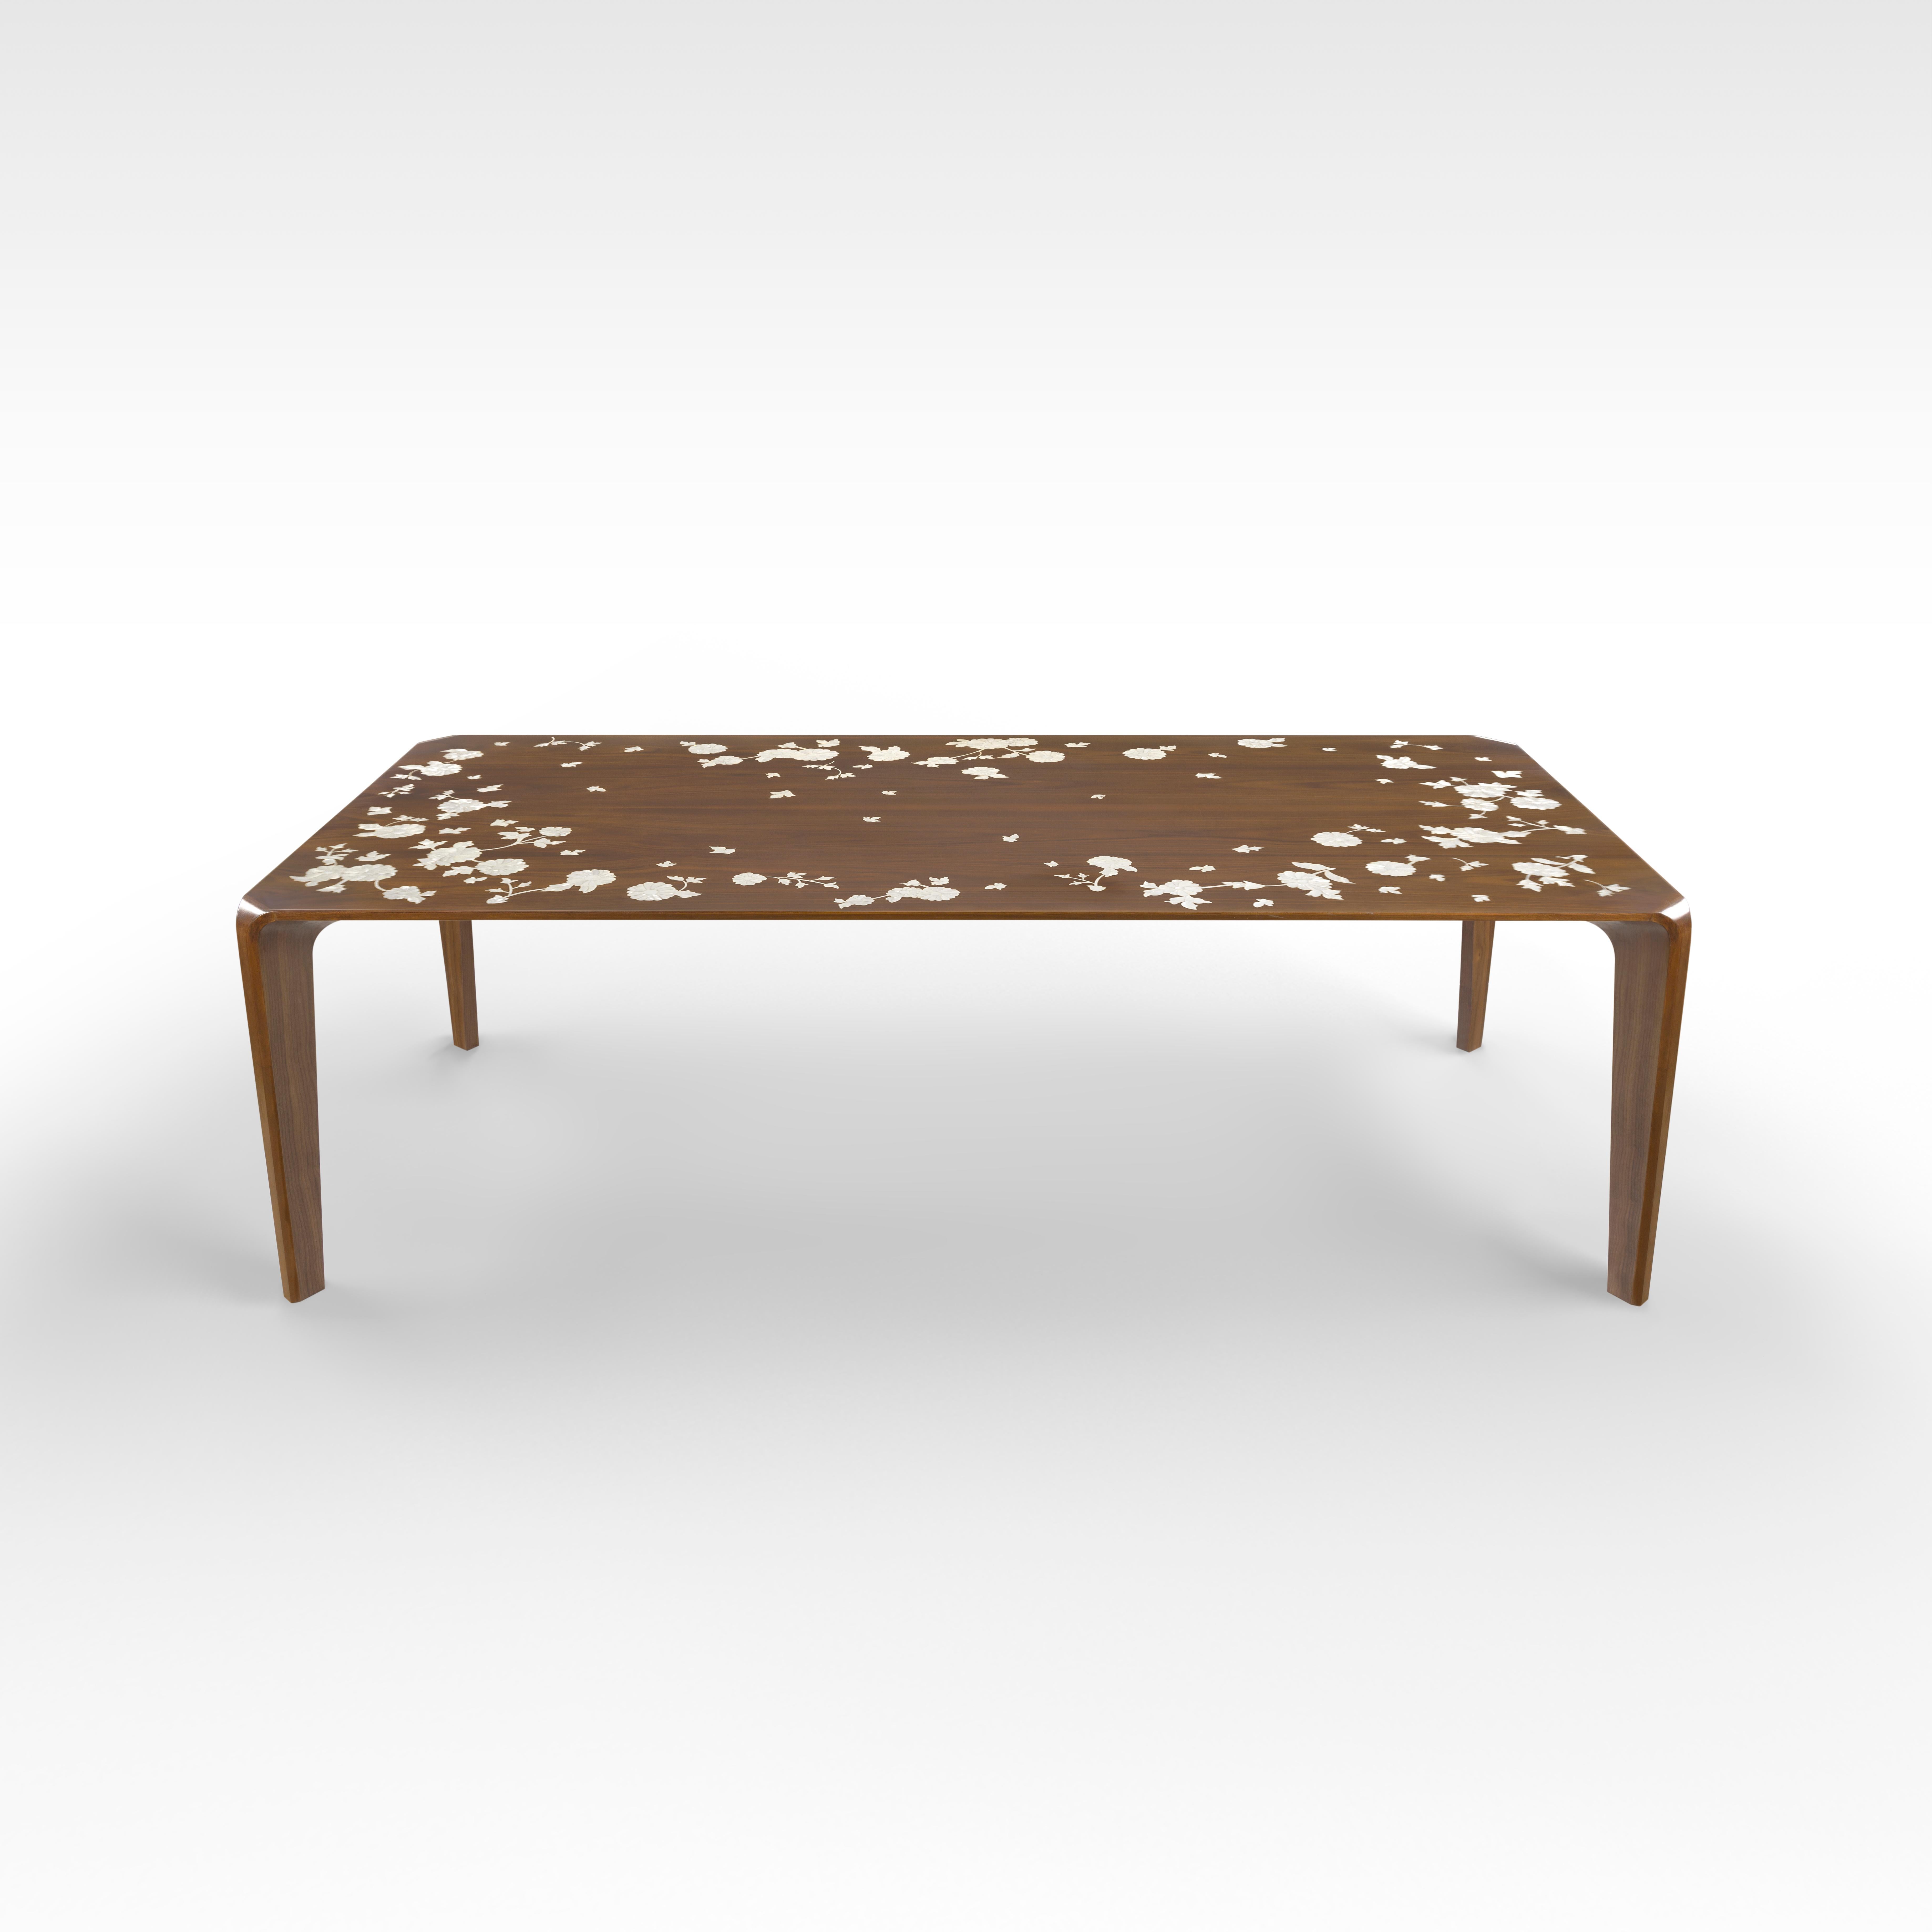 Egyptian Dining Table with Hand-Laid Floral Mother-of-Pearl & Massive Curved Walnut Legs For Sale